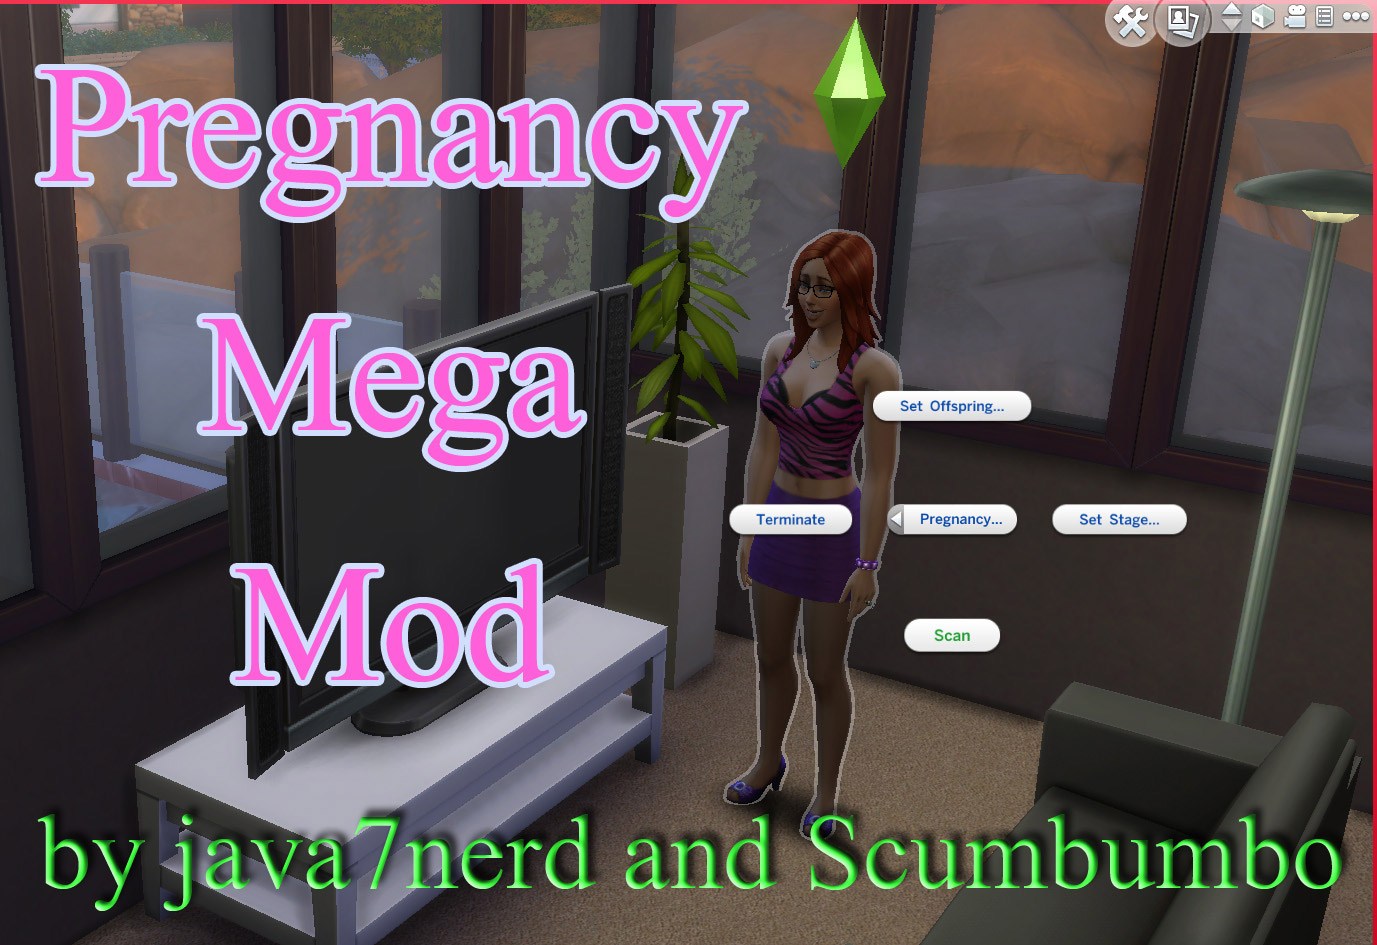 sims 4 mod for teen pregnancy